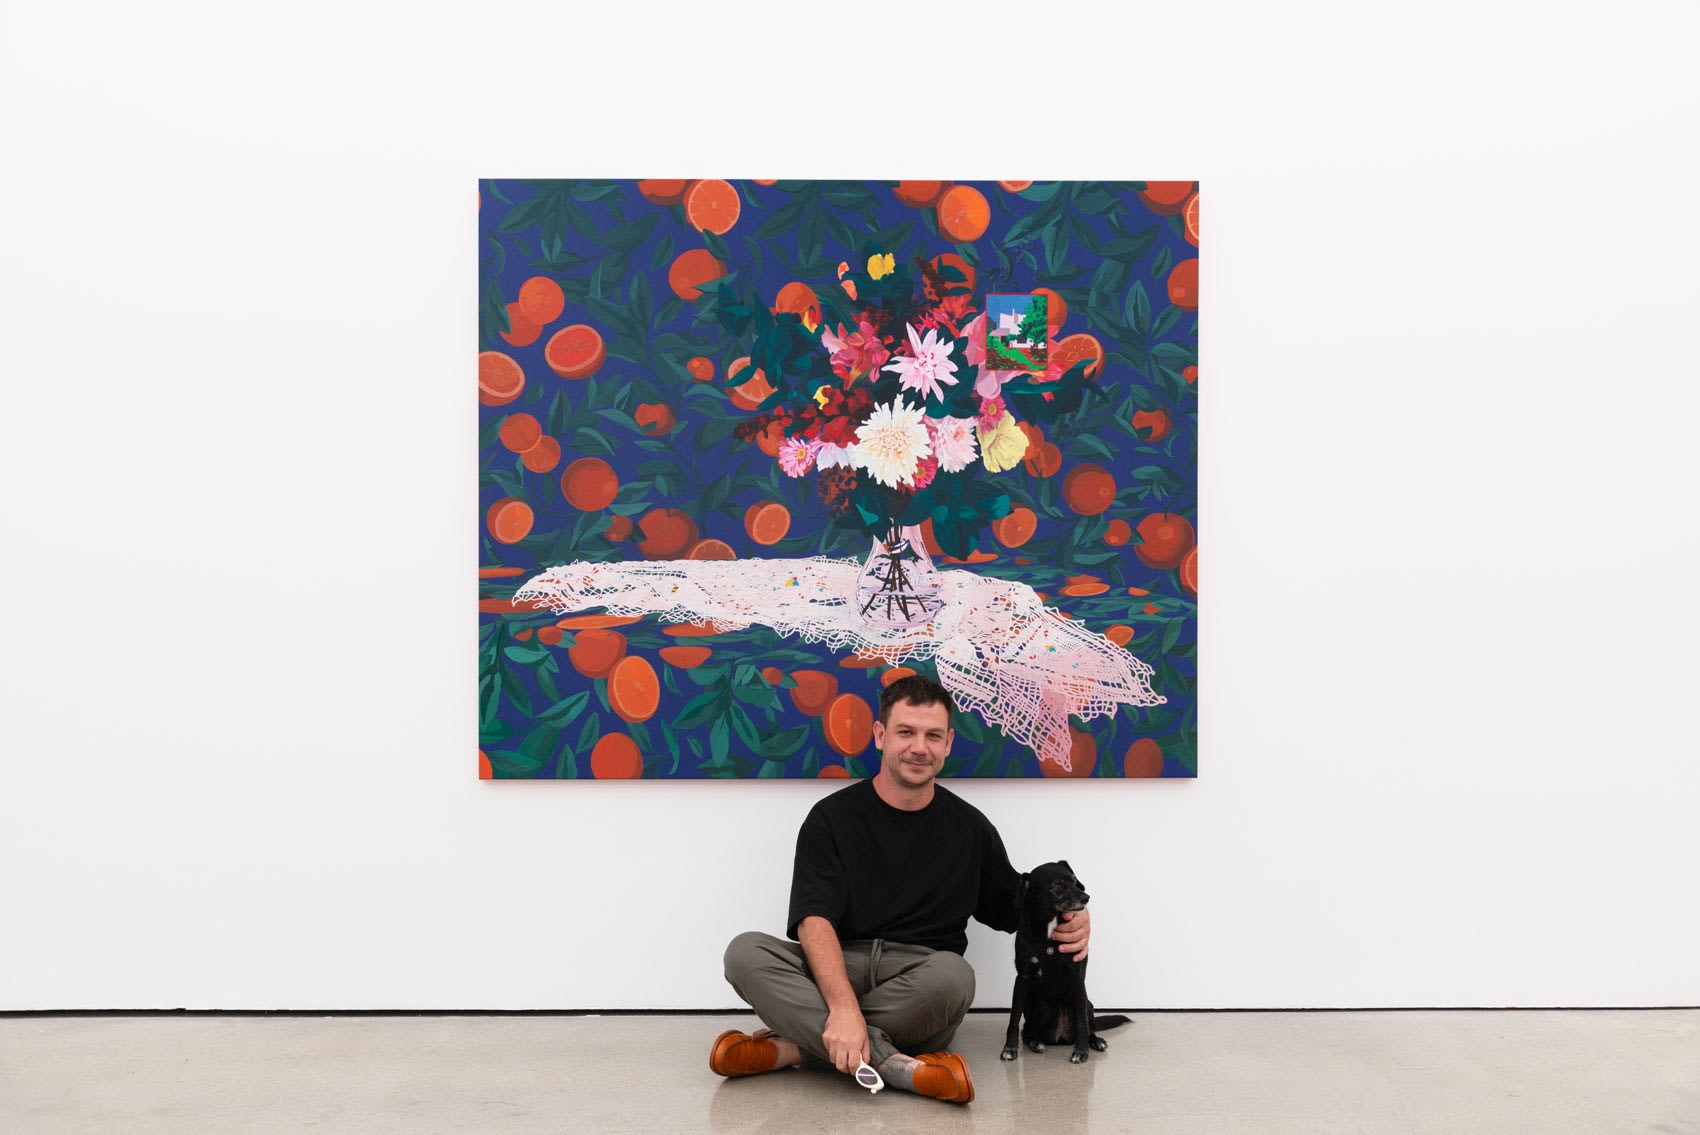 Artist Francisco Diaz Scotto with a small black dog, Meera, sitting on the ground in front of one of his large scale paintings, which is mostly blue and orange, with a bright bouquet of flowers on a white lace table cloth in the middle of the composition.